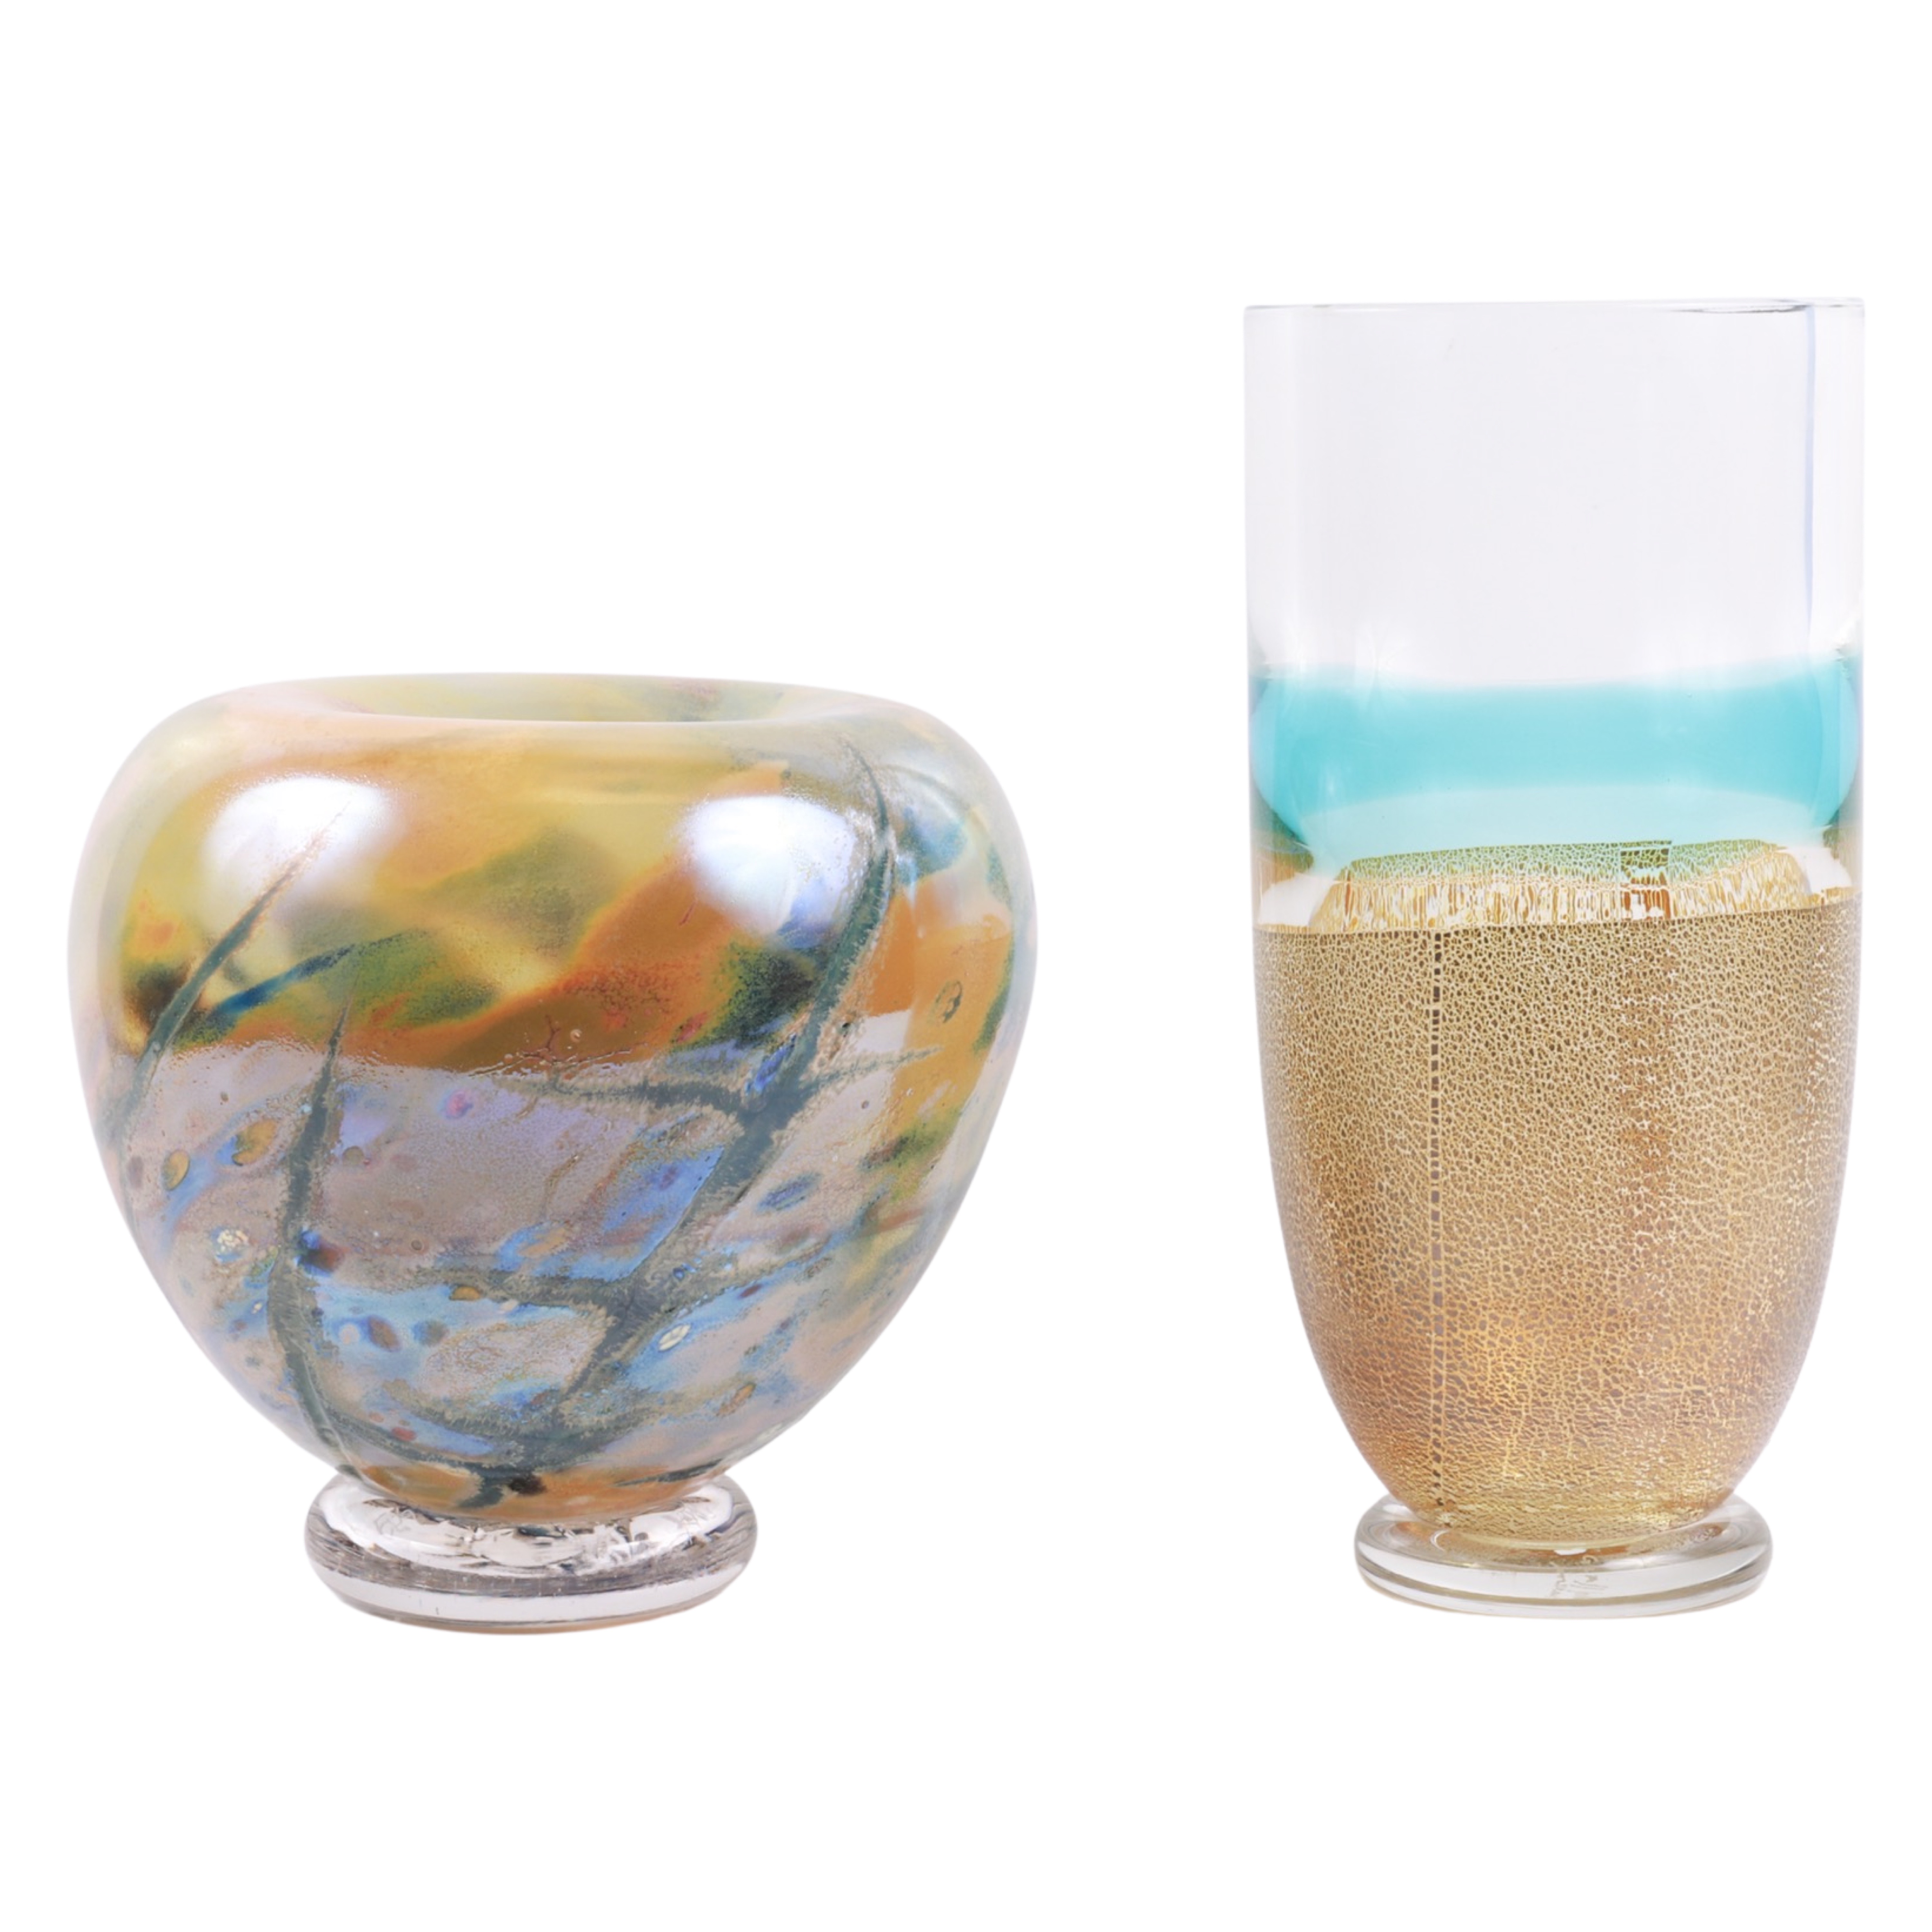  2 Art glass vases to include 3b45fd